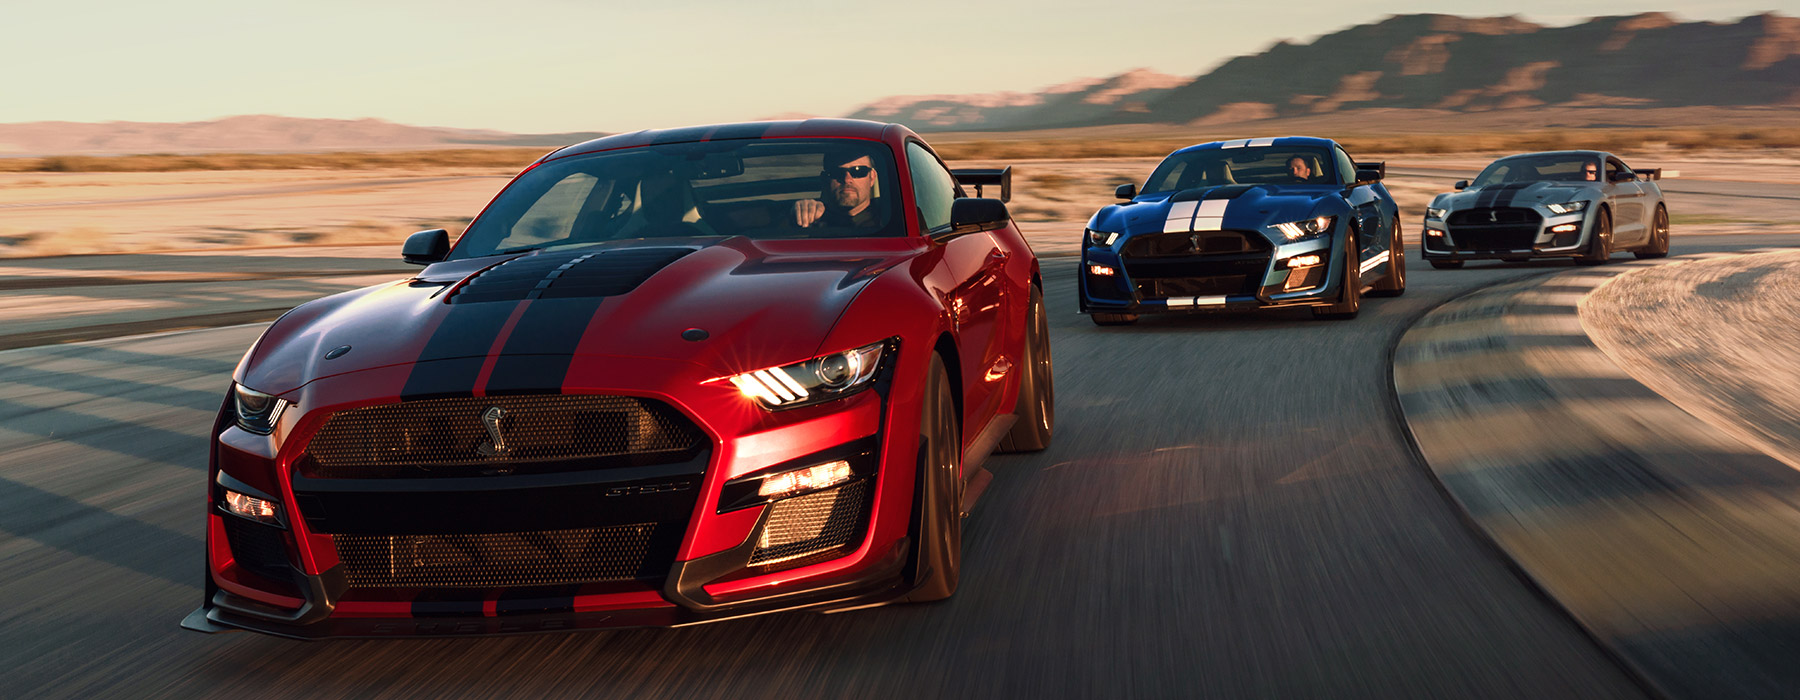 Drive a Shelby GT500 On a Racetrack at Exotics Racing